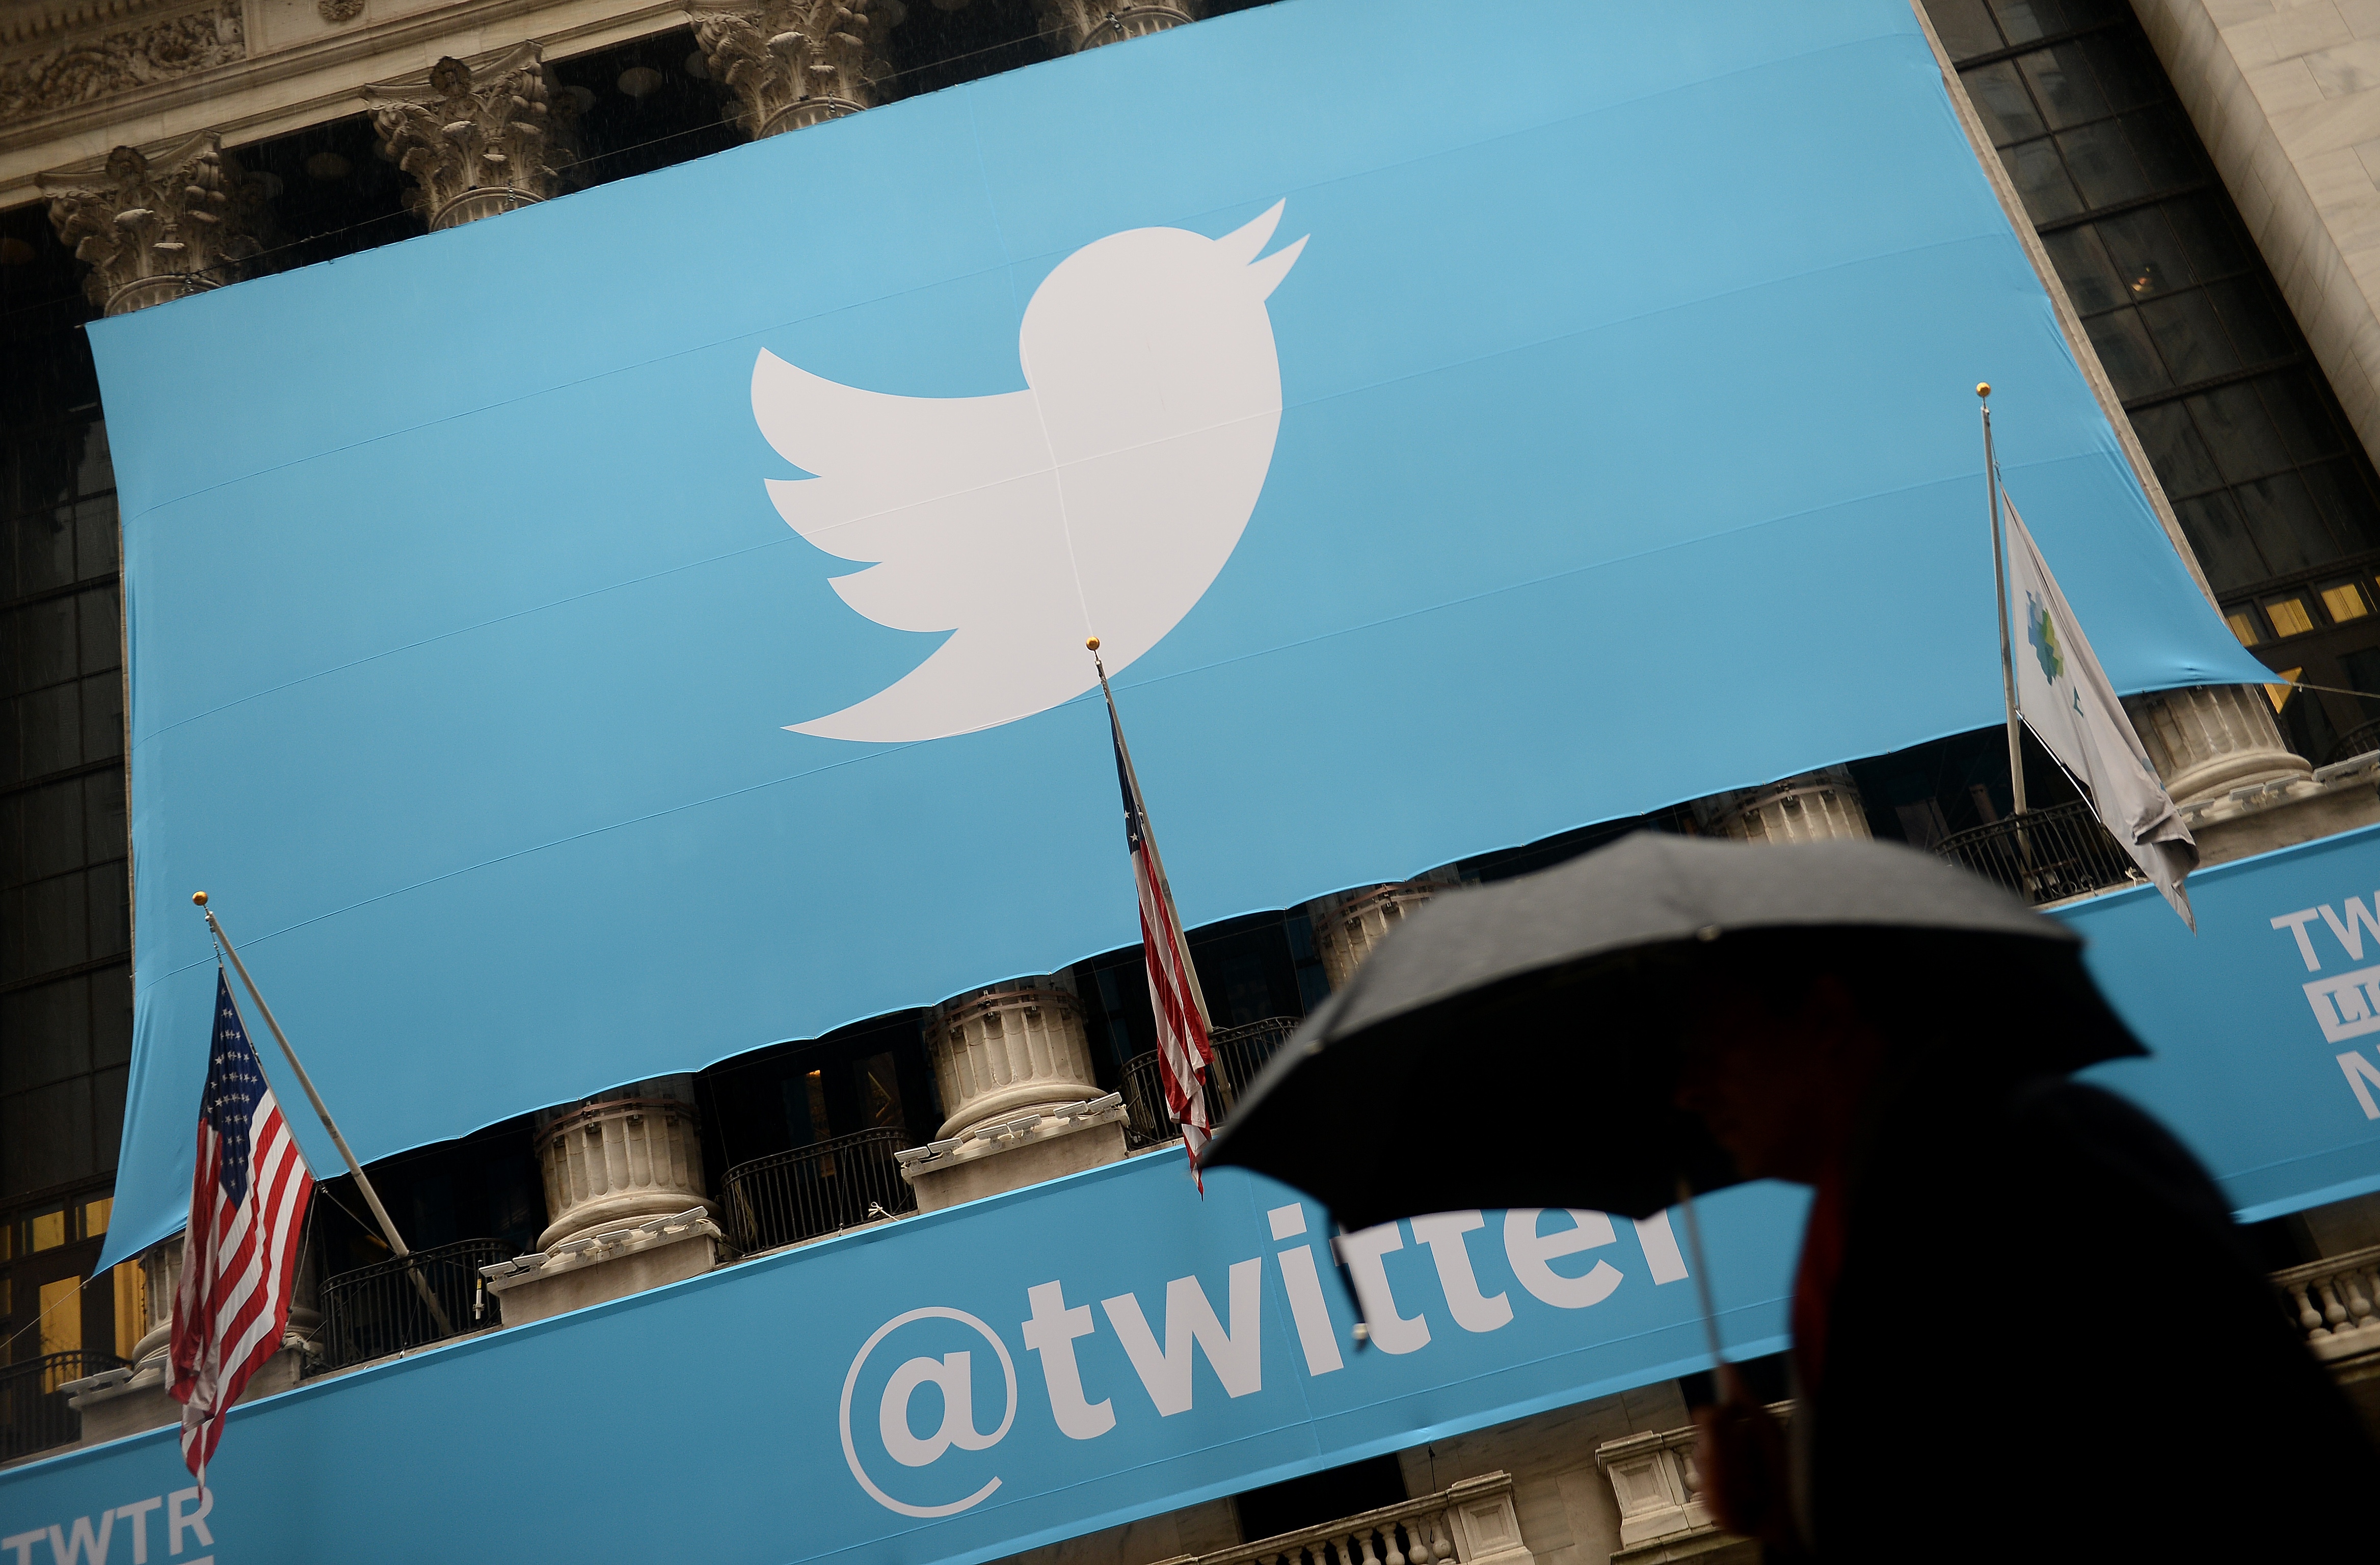 A banner with the logo of Twitter is set on the front of the New York Stock Exchange (NYSE) on November 7, 2013 in New York.  Twitter hit Wall Street with a bang on Thursday, as an investor frenzy quickly sent shares surging after the public share offering for the fast-growing social network. In the first exchanges, Twitter vaulted 80.7 percent to $47, a day after the initial public offering (IPO) at $26 per share. While some analysts cautioned about the fast-changing nature of social media, the debut led to a stampede for Twitter shares. AFP PHOTO/EMMANUEL DUNAND / AFP PHOTO / EMMANUEL DUNAND